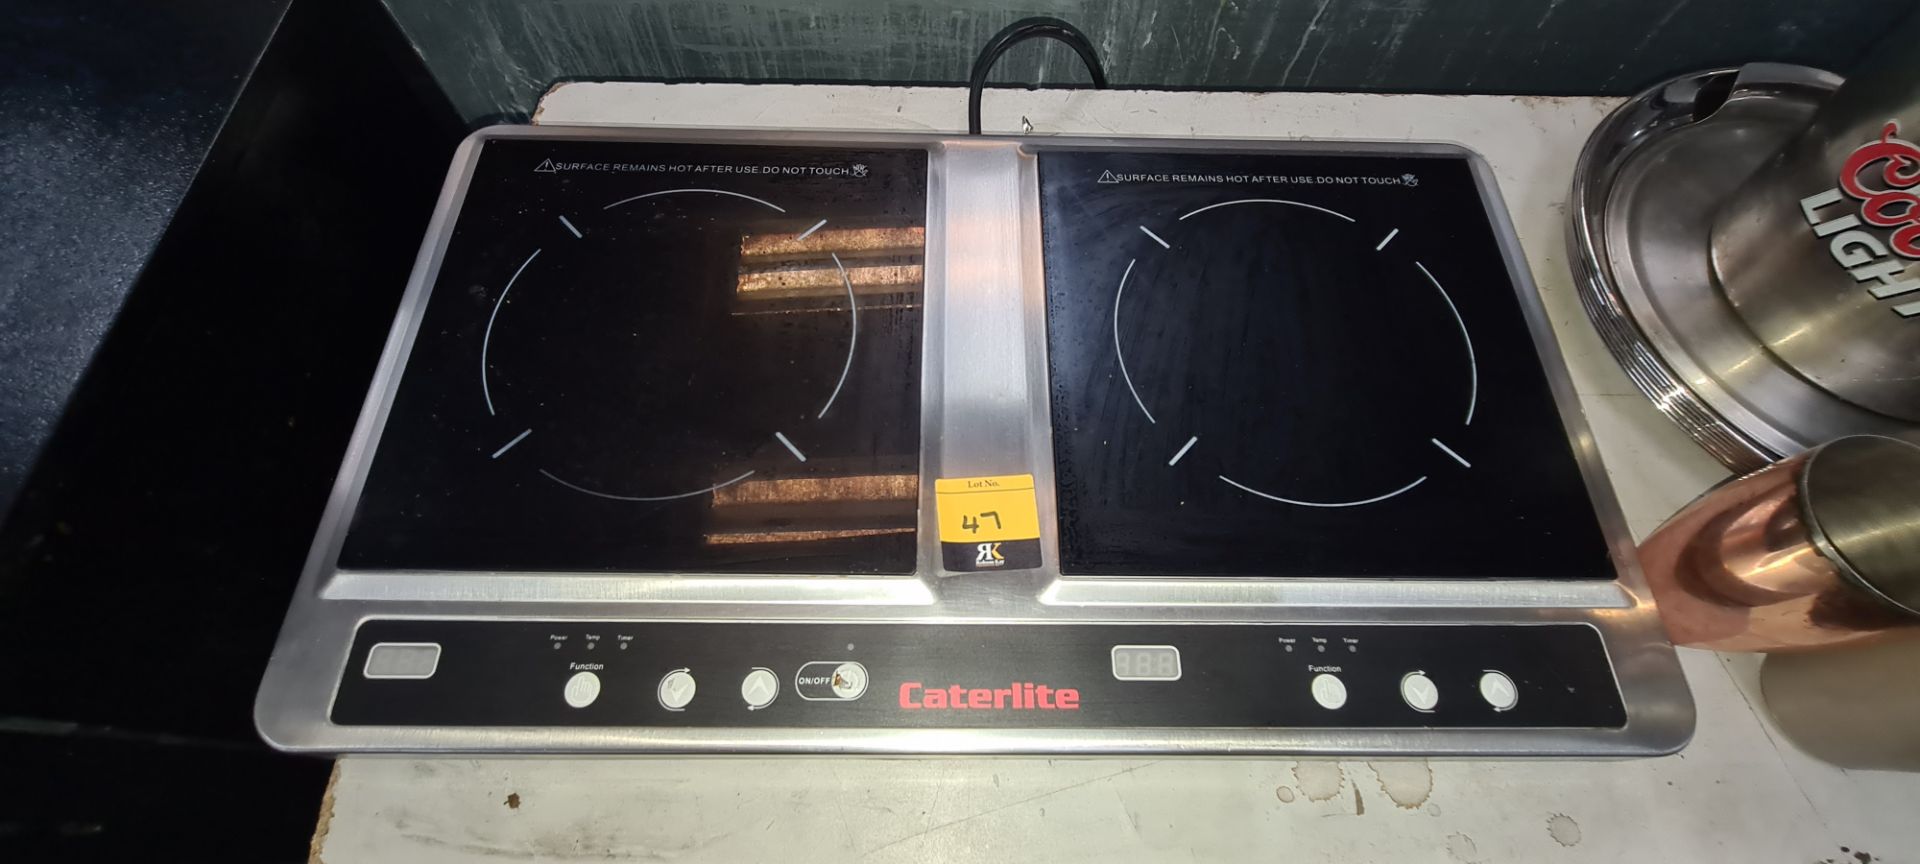 Caterlite benchtop twin electric hob system